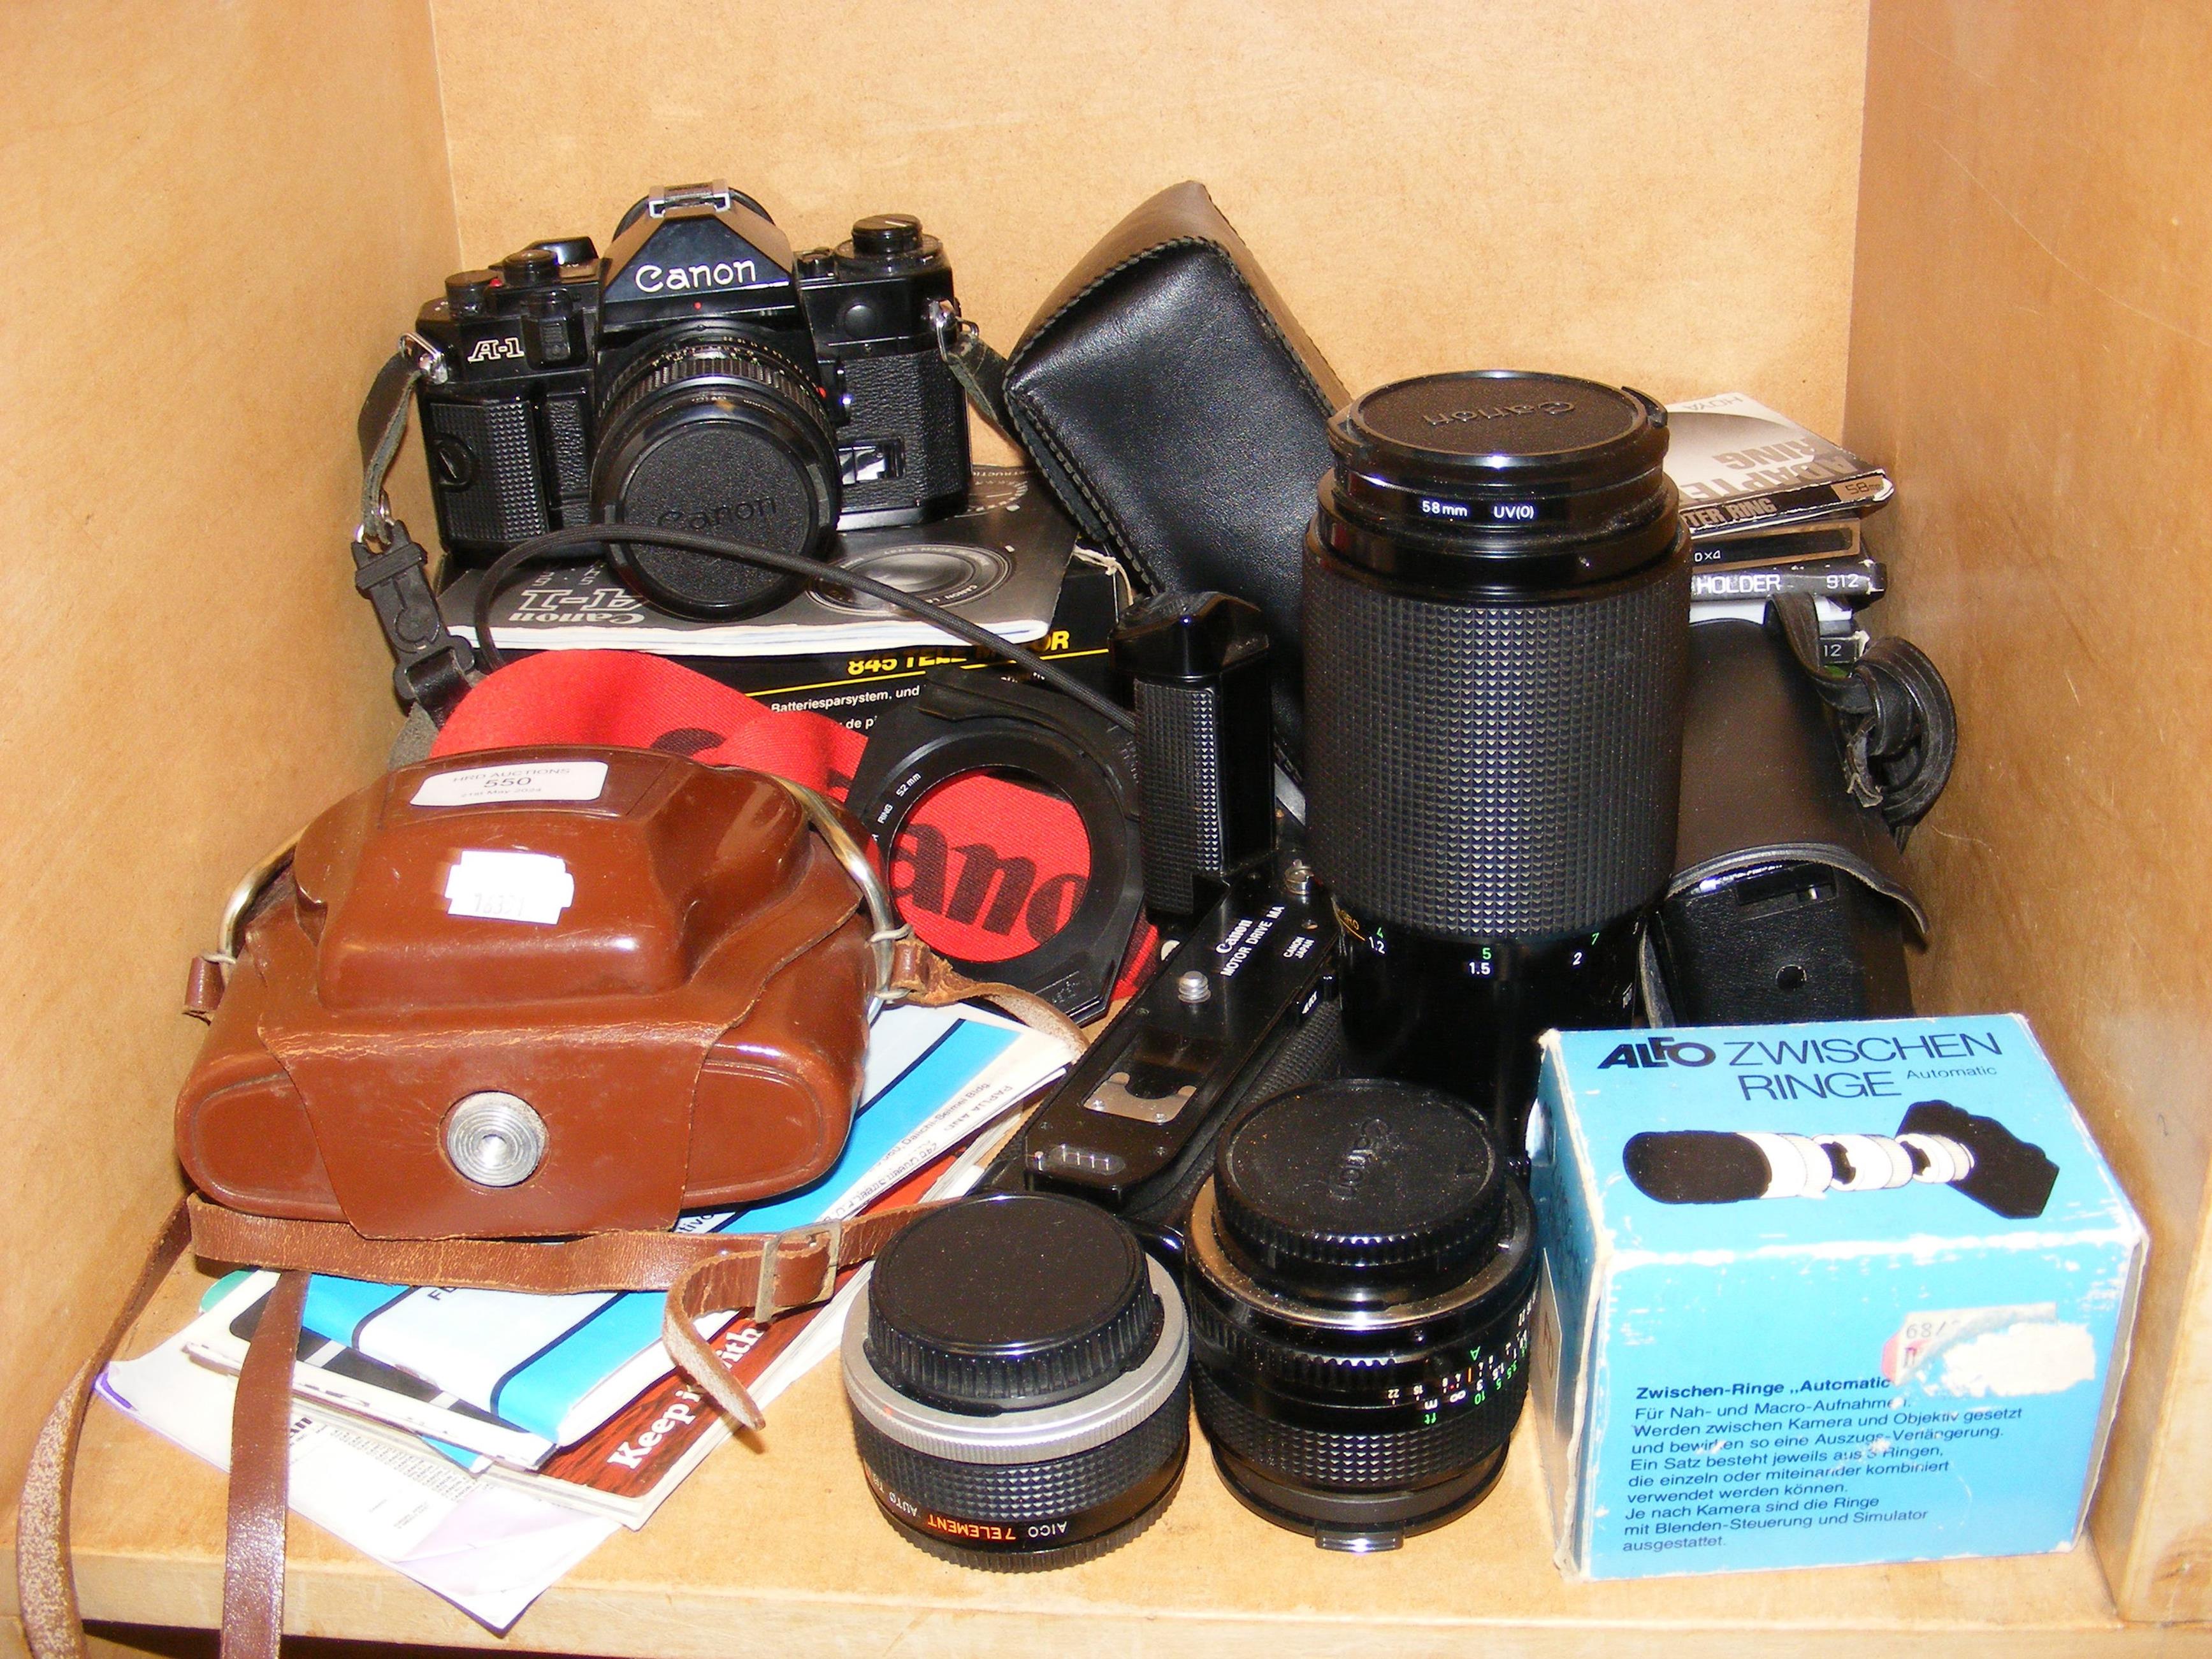 Vintage photographic equipment, including Canon A-